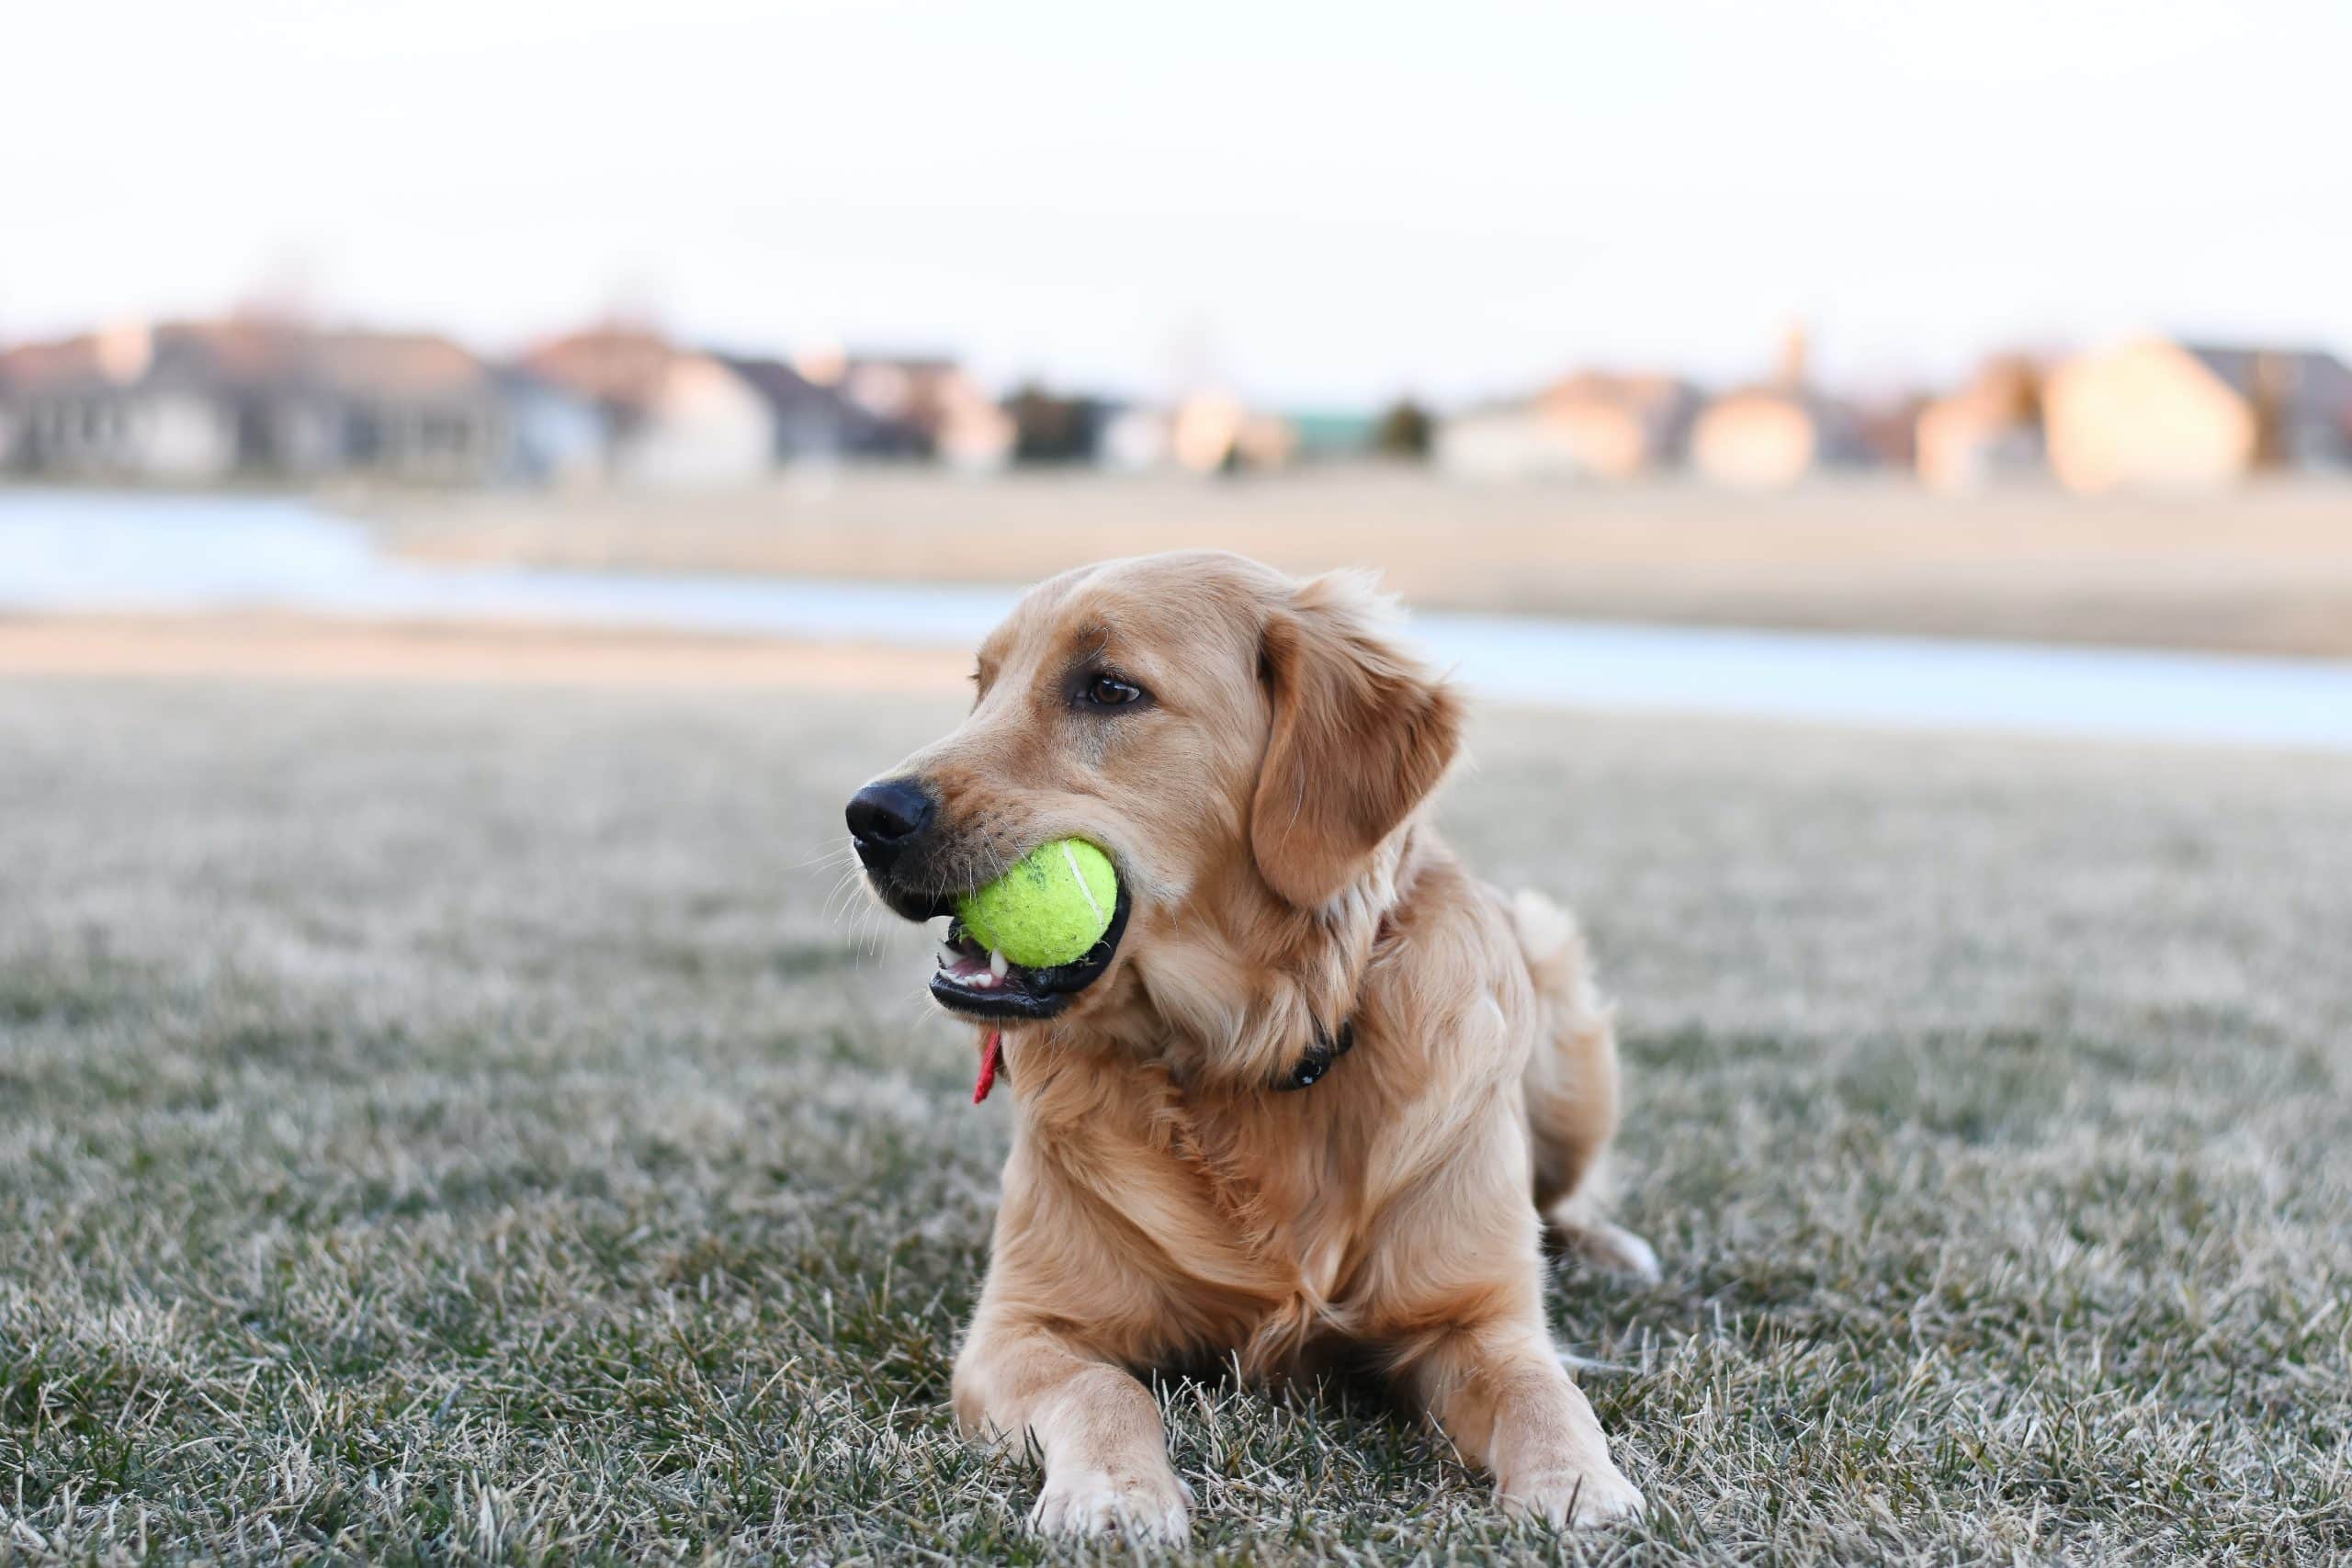 Golden Retriever lying on grass with tennis ball in its mouth